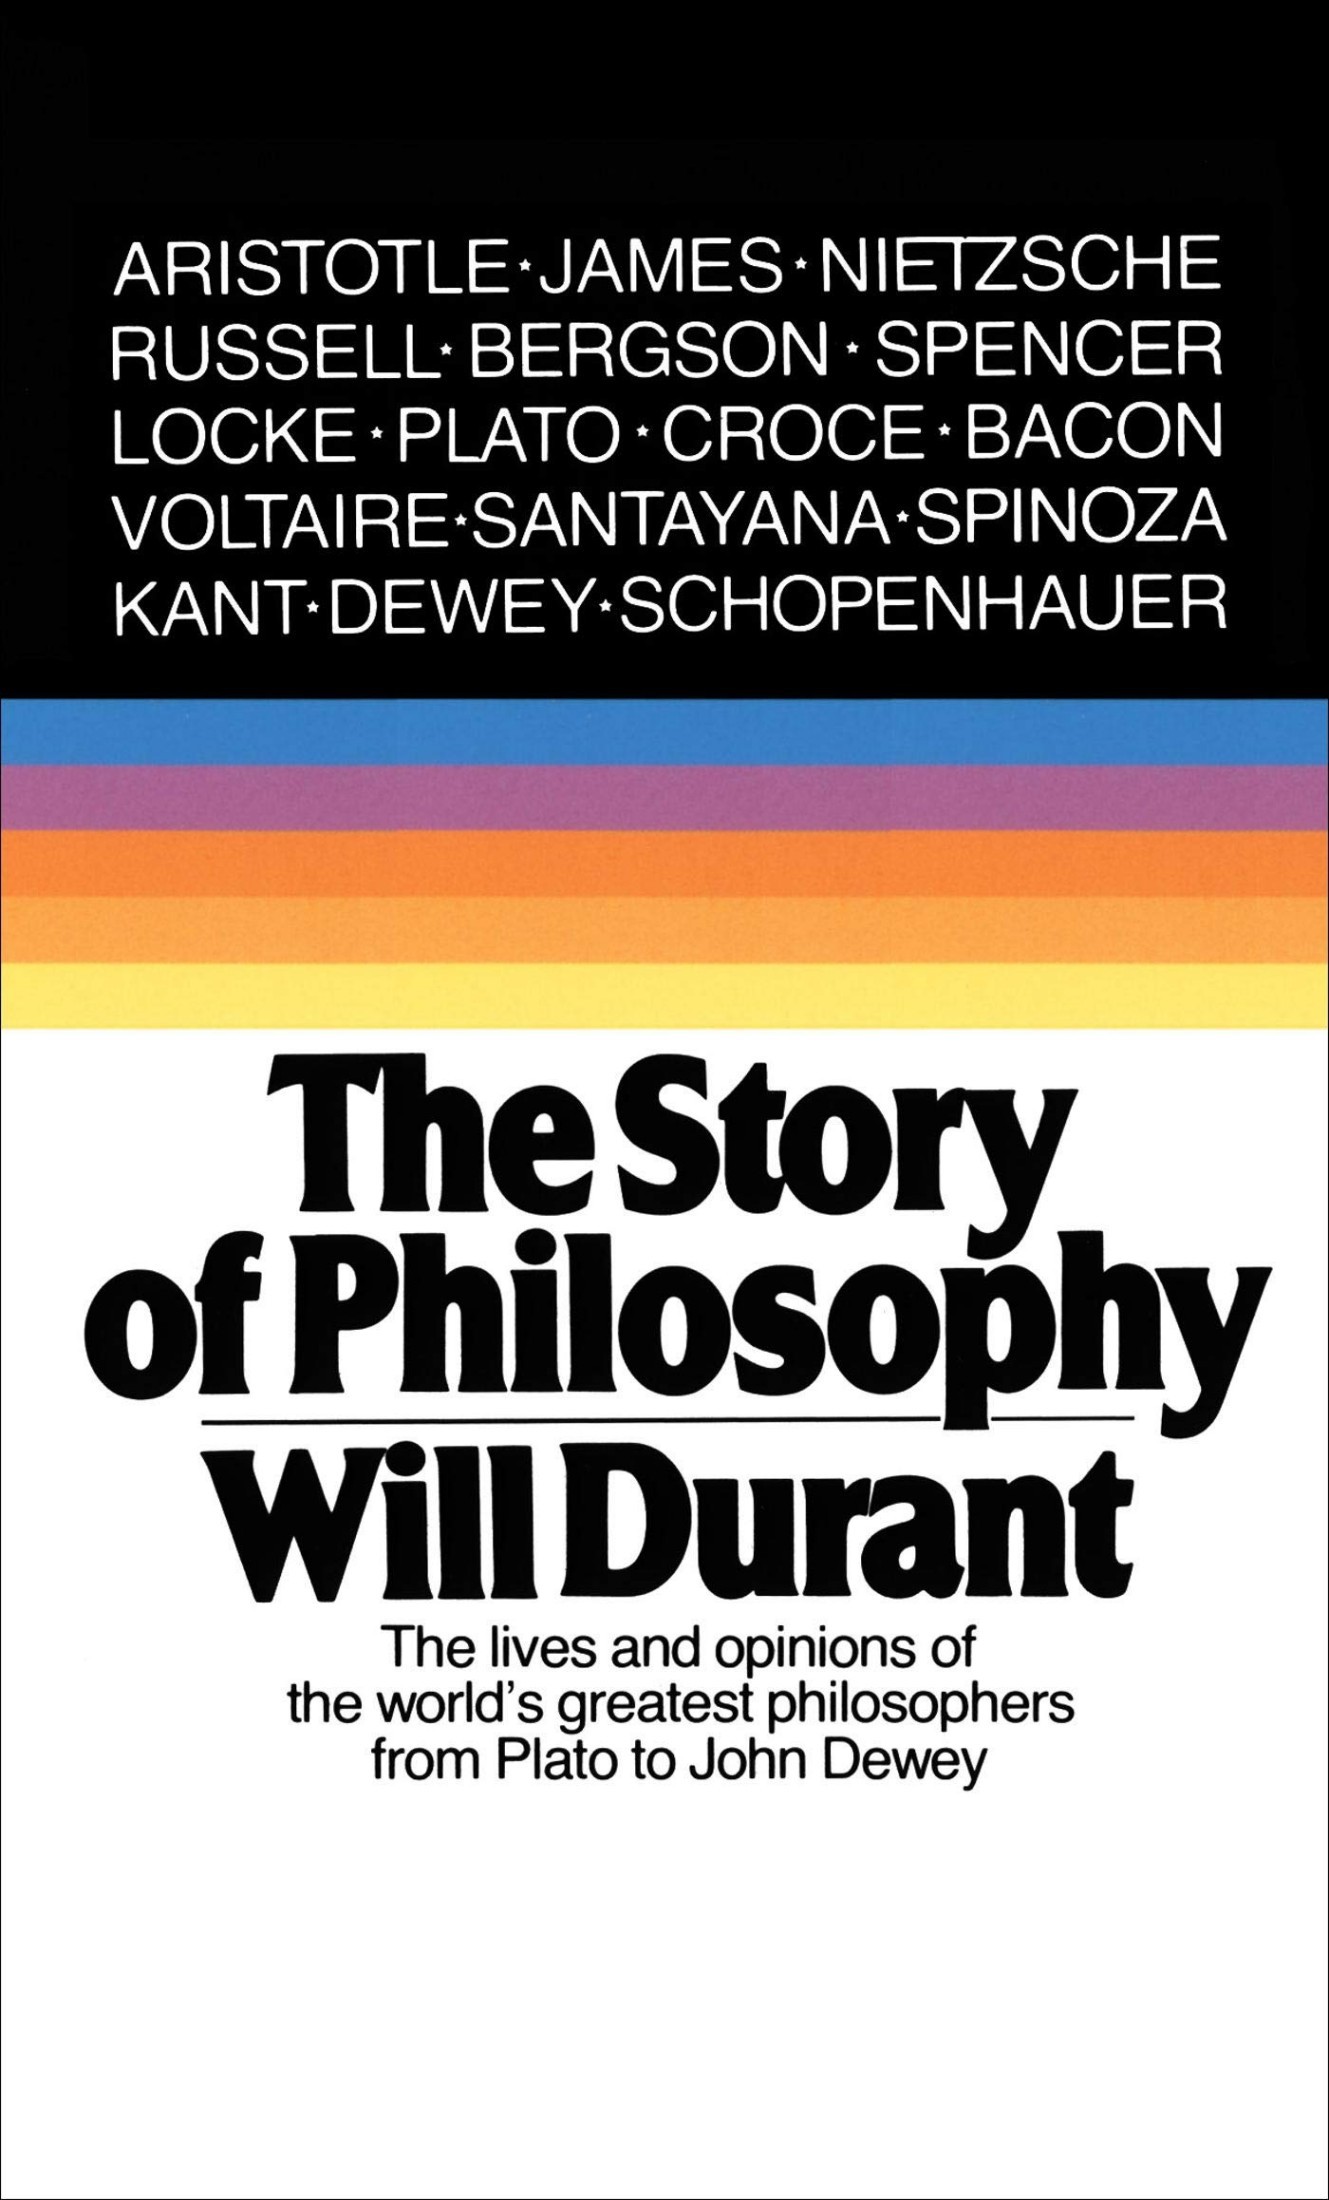 The Story of Philosophy: The Lives and Opinions of the Great Philosophers of the Western World (In Focus Biographies)